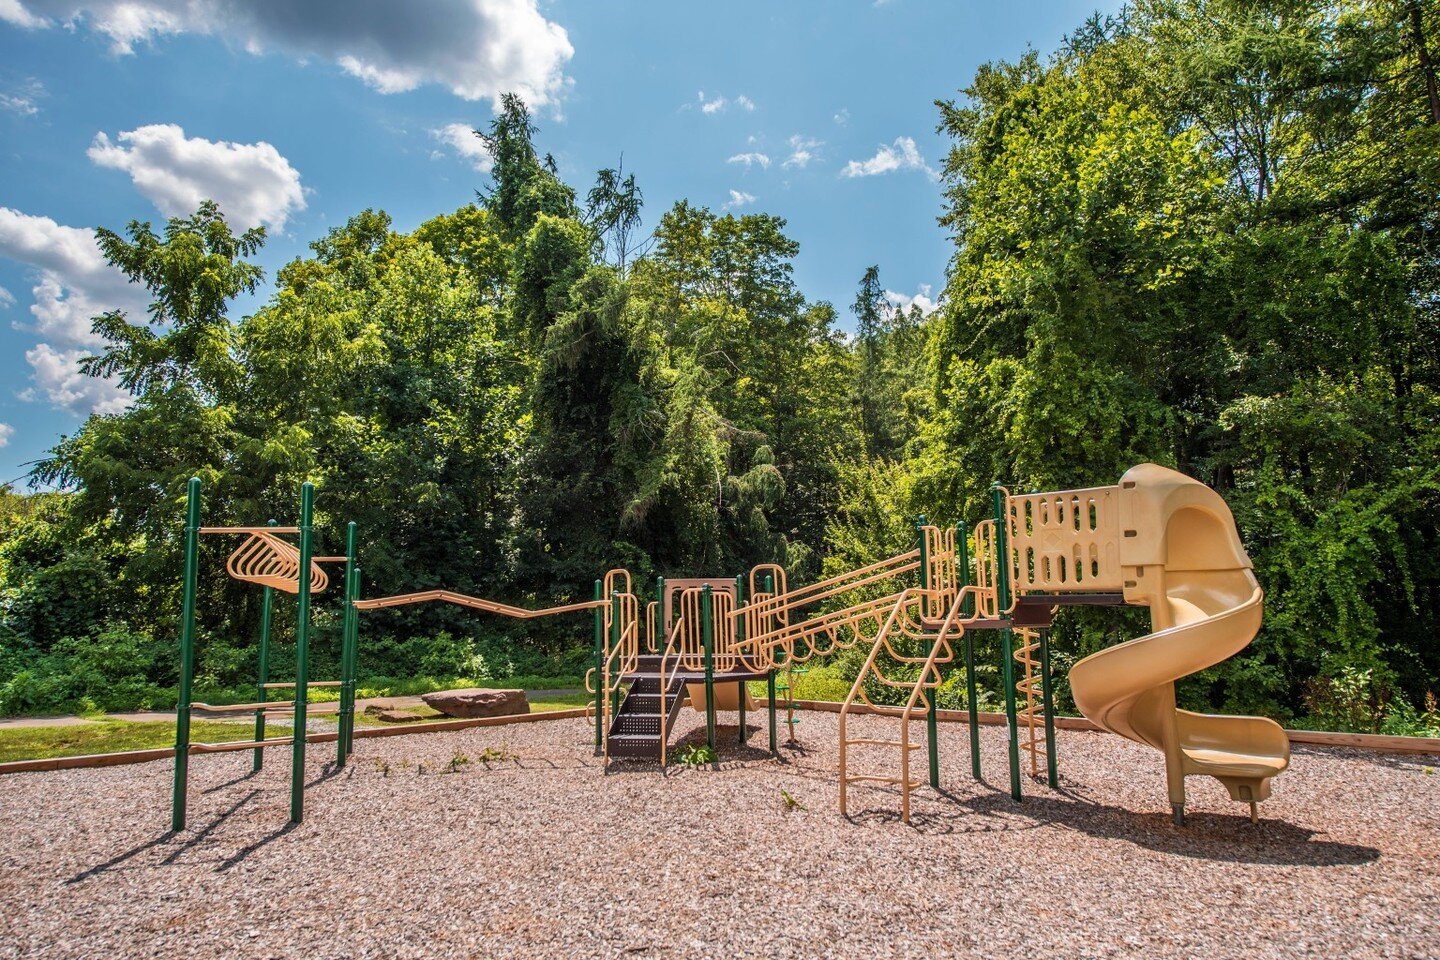 Tag, you're it! Lucky to have our playground as one of our fun amenities! 😍

#playground #communityliving #northwoodsapts #connecticutapartments #connecticuthome #connecticutapartments